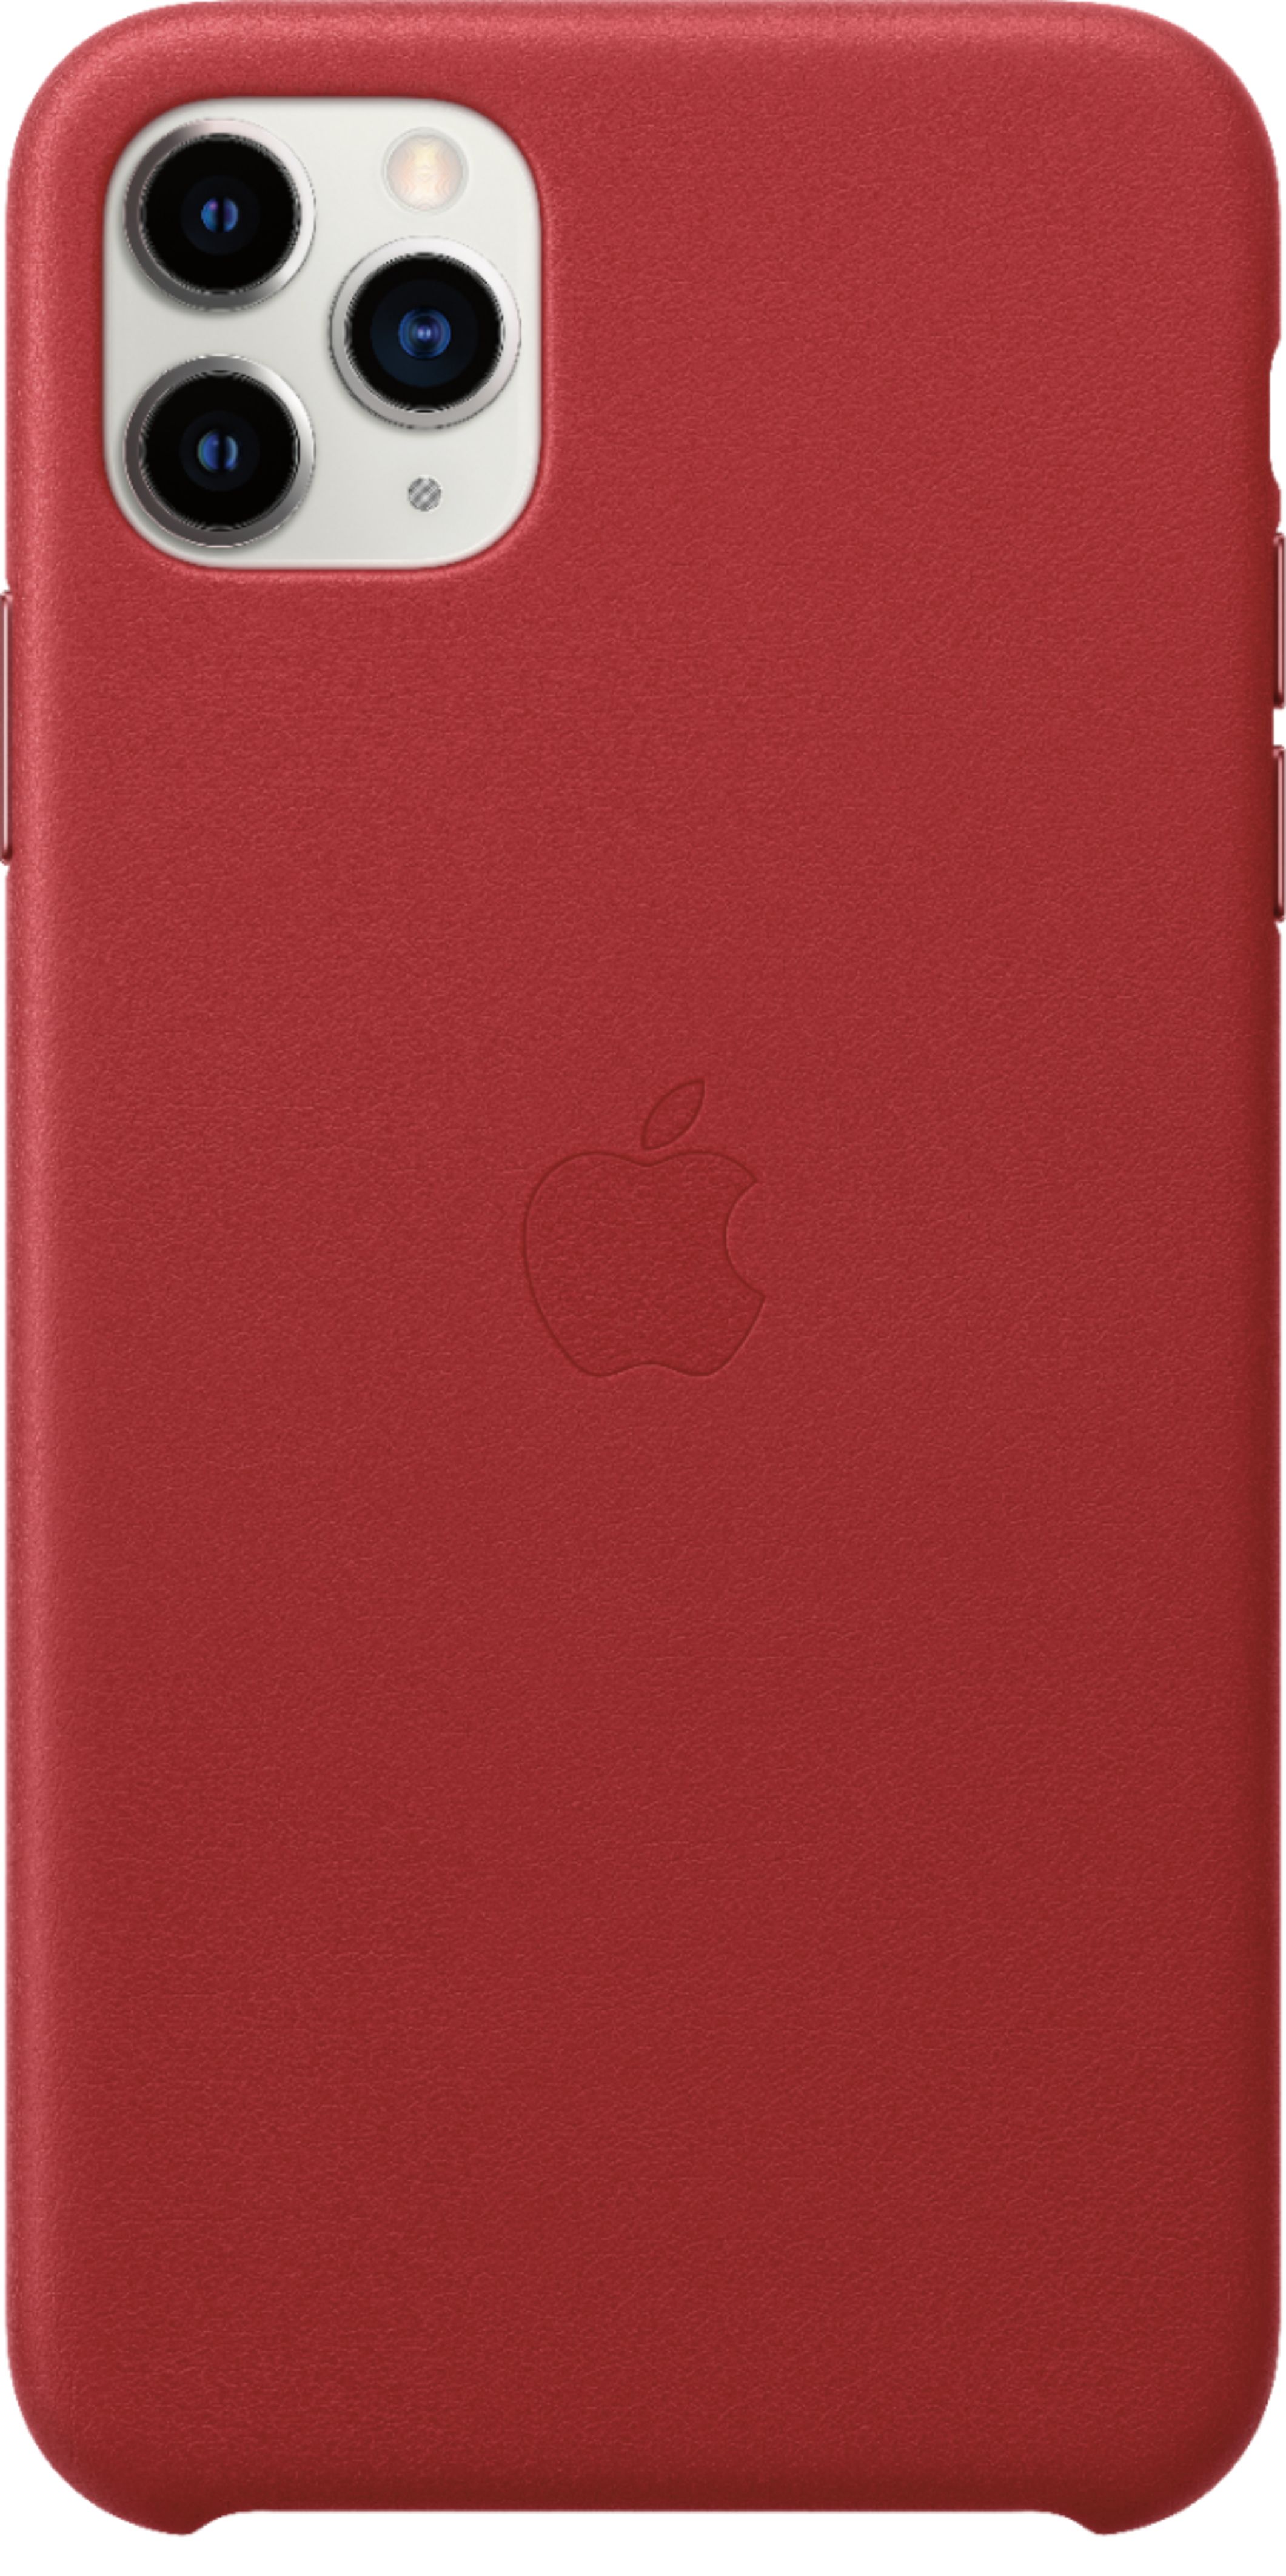 Apple Pro Max Leather Case (PRODUCT)RED MX0F2ZM/A - Best Buy